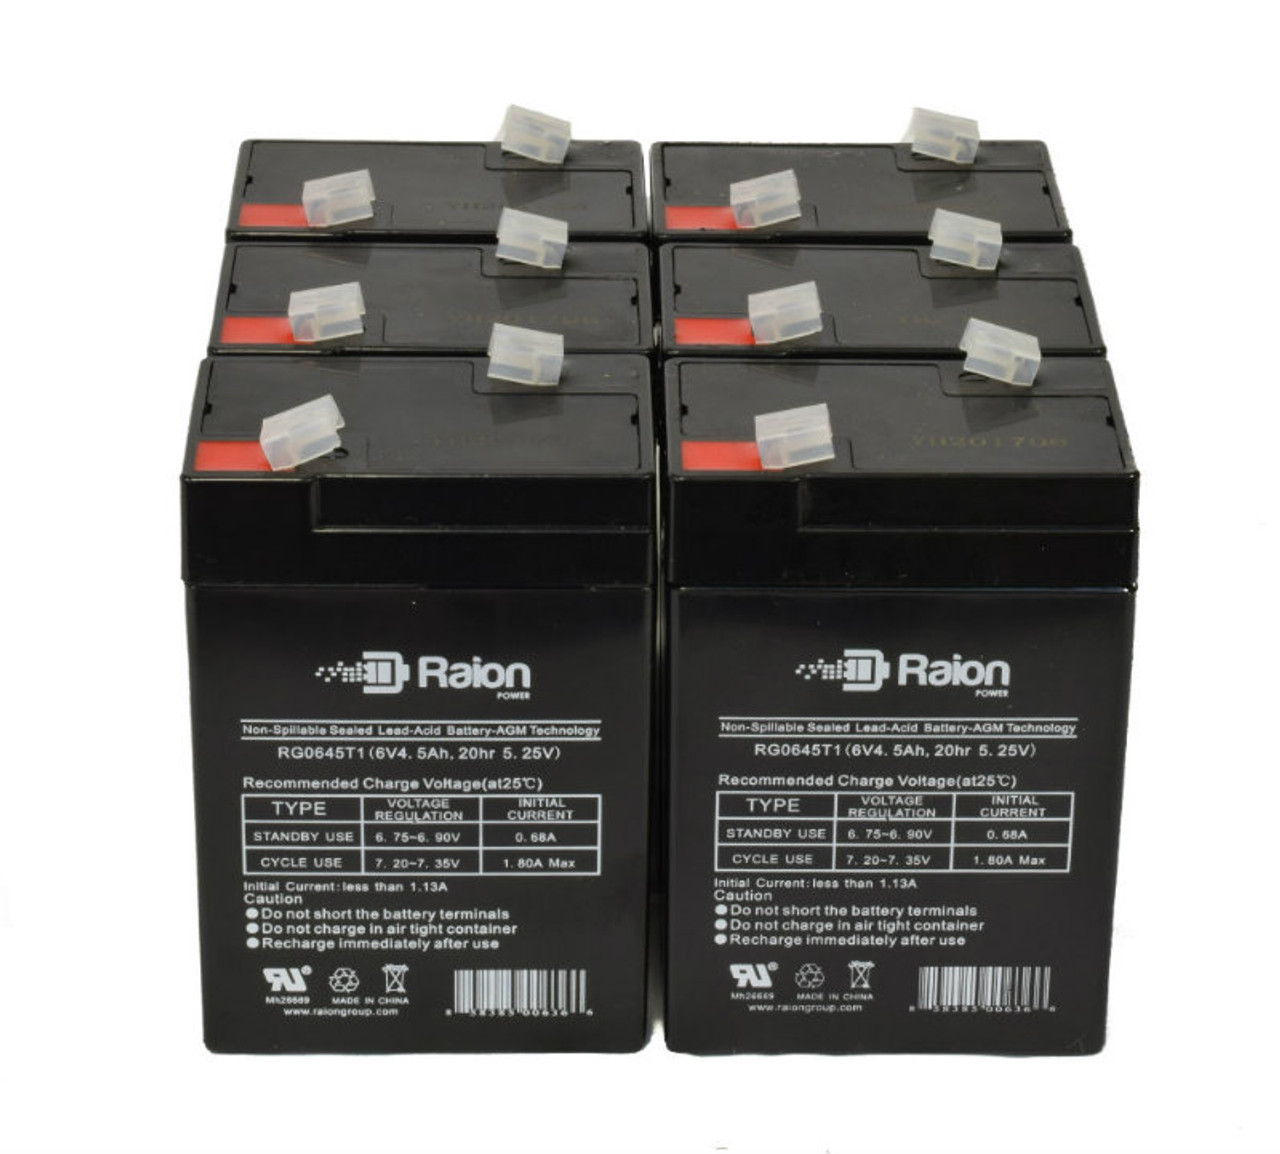 Raion Power 6 Volt 4.5Ah RG0645T1 Replacement Battery for Tempest TR5.6-6 - 6 Pack